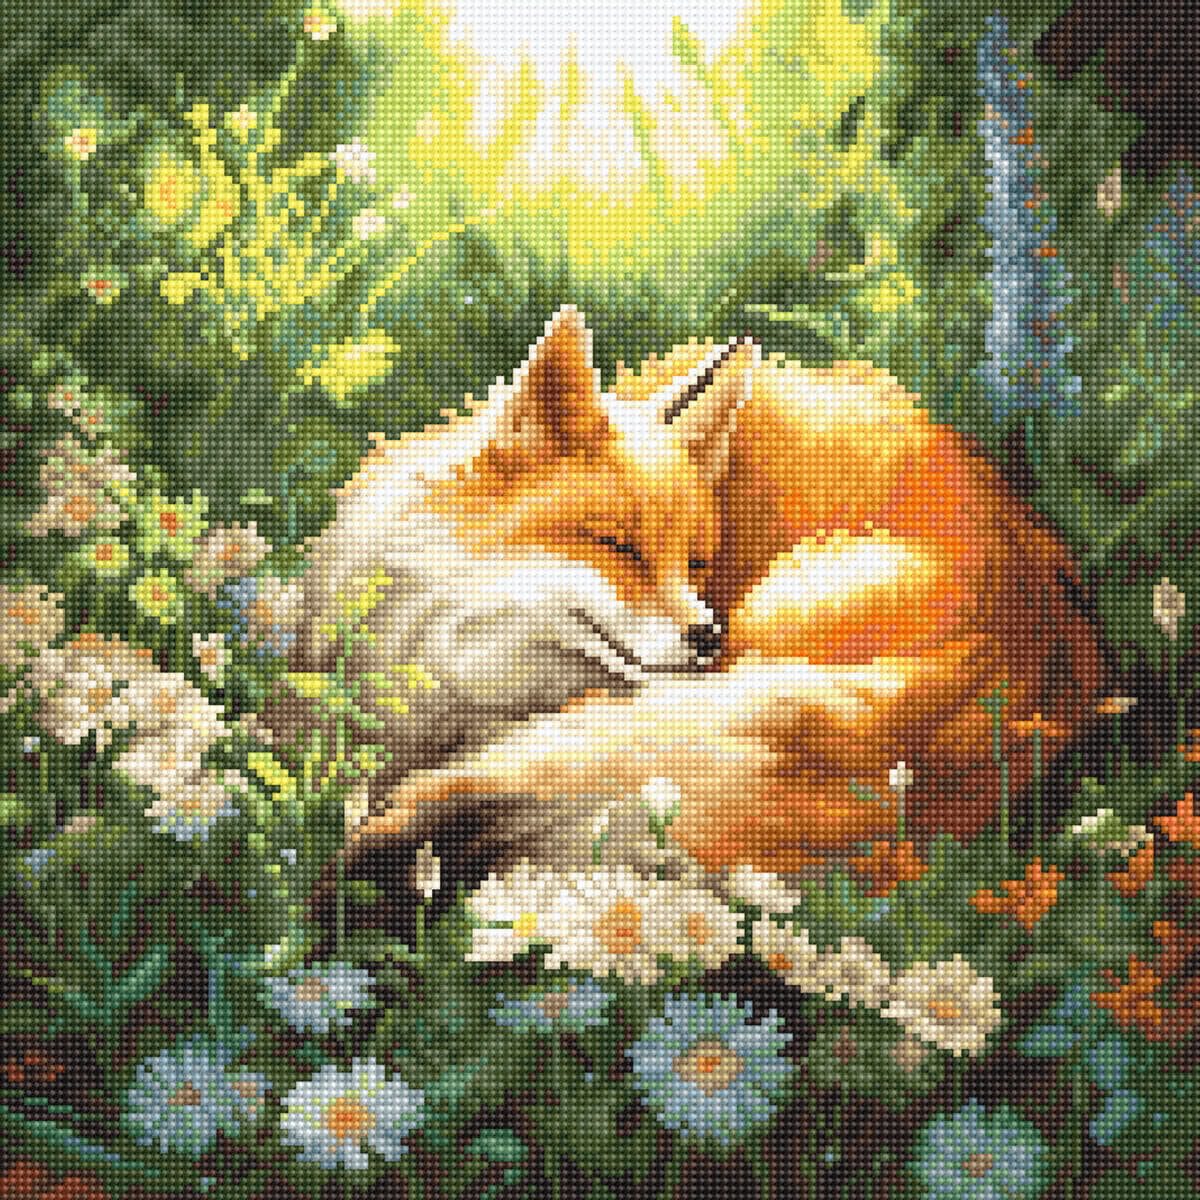 Embroidery pack (Letistitch) of a fox curled up sleeping...